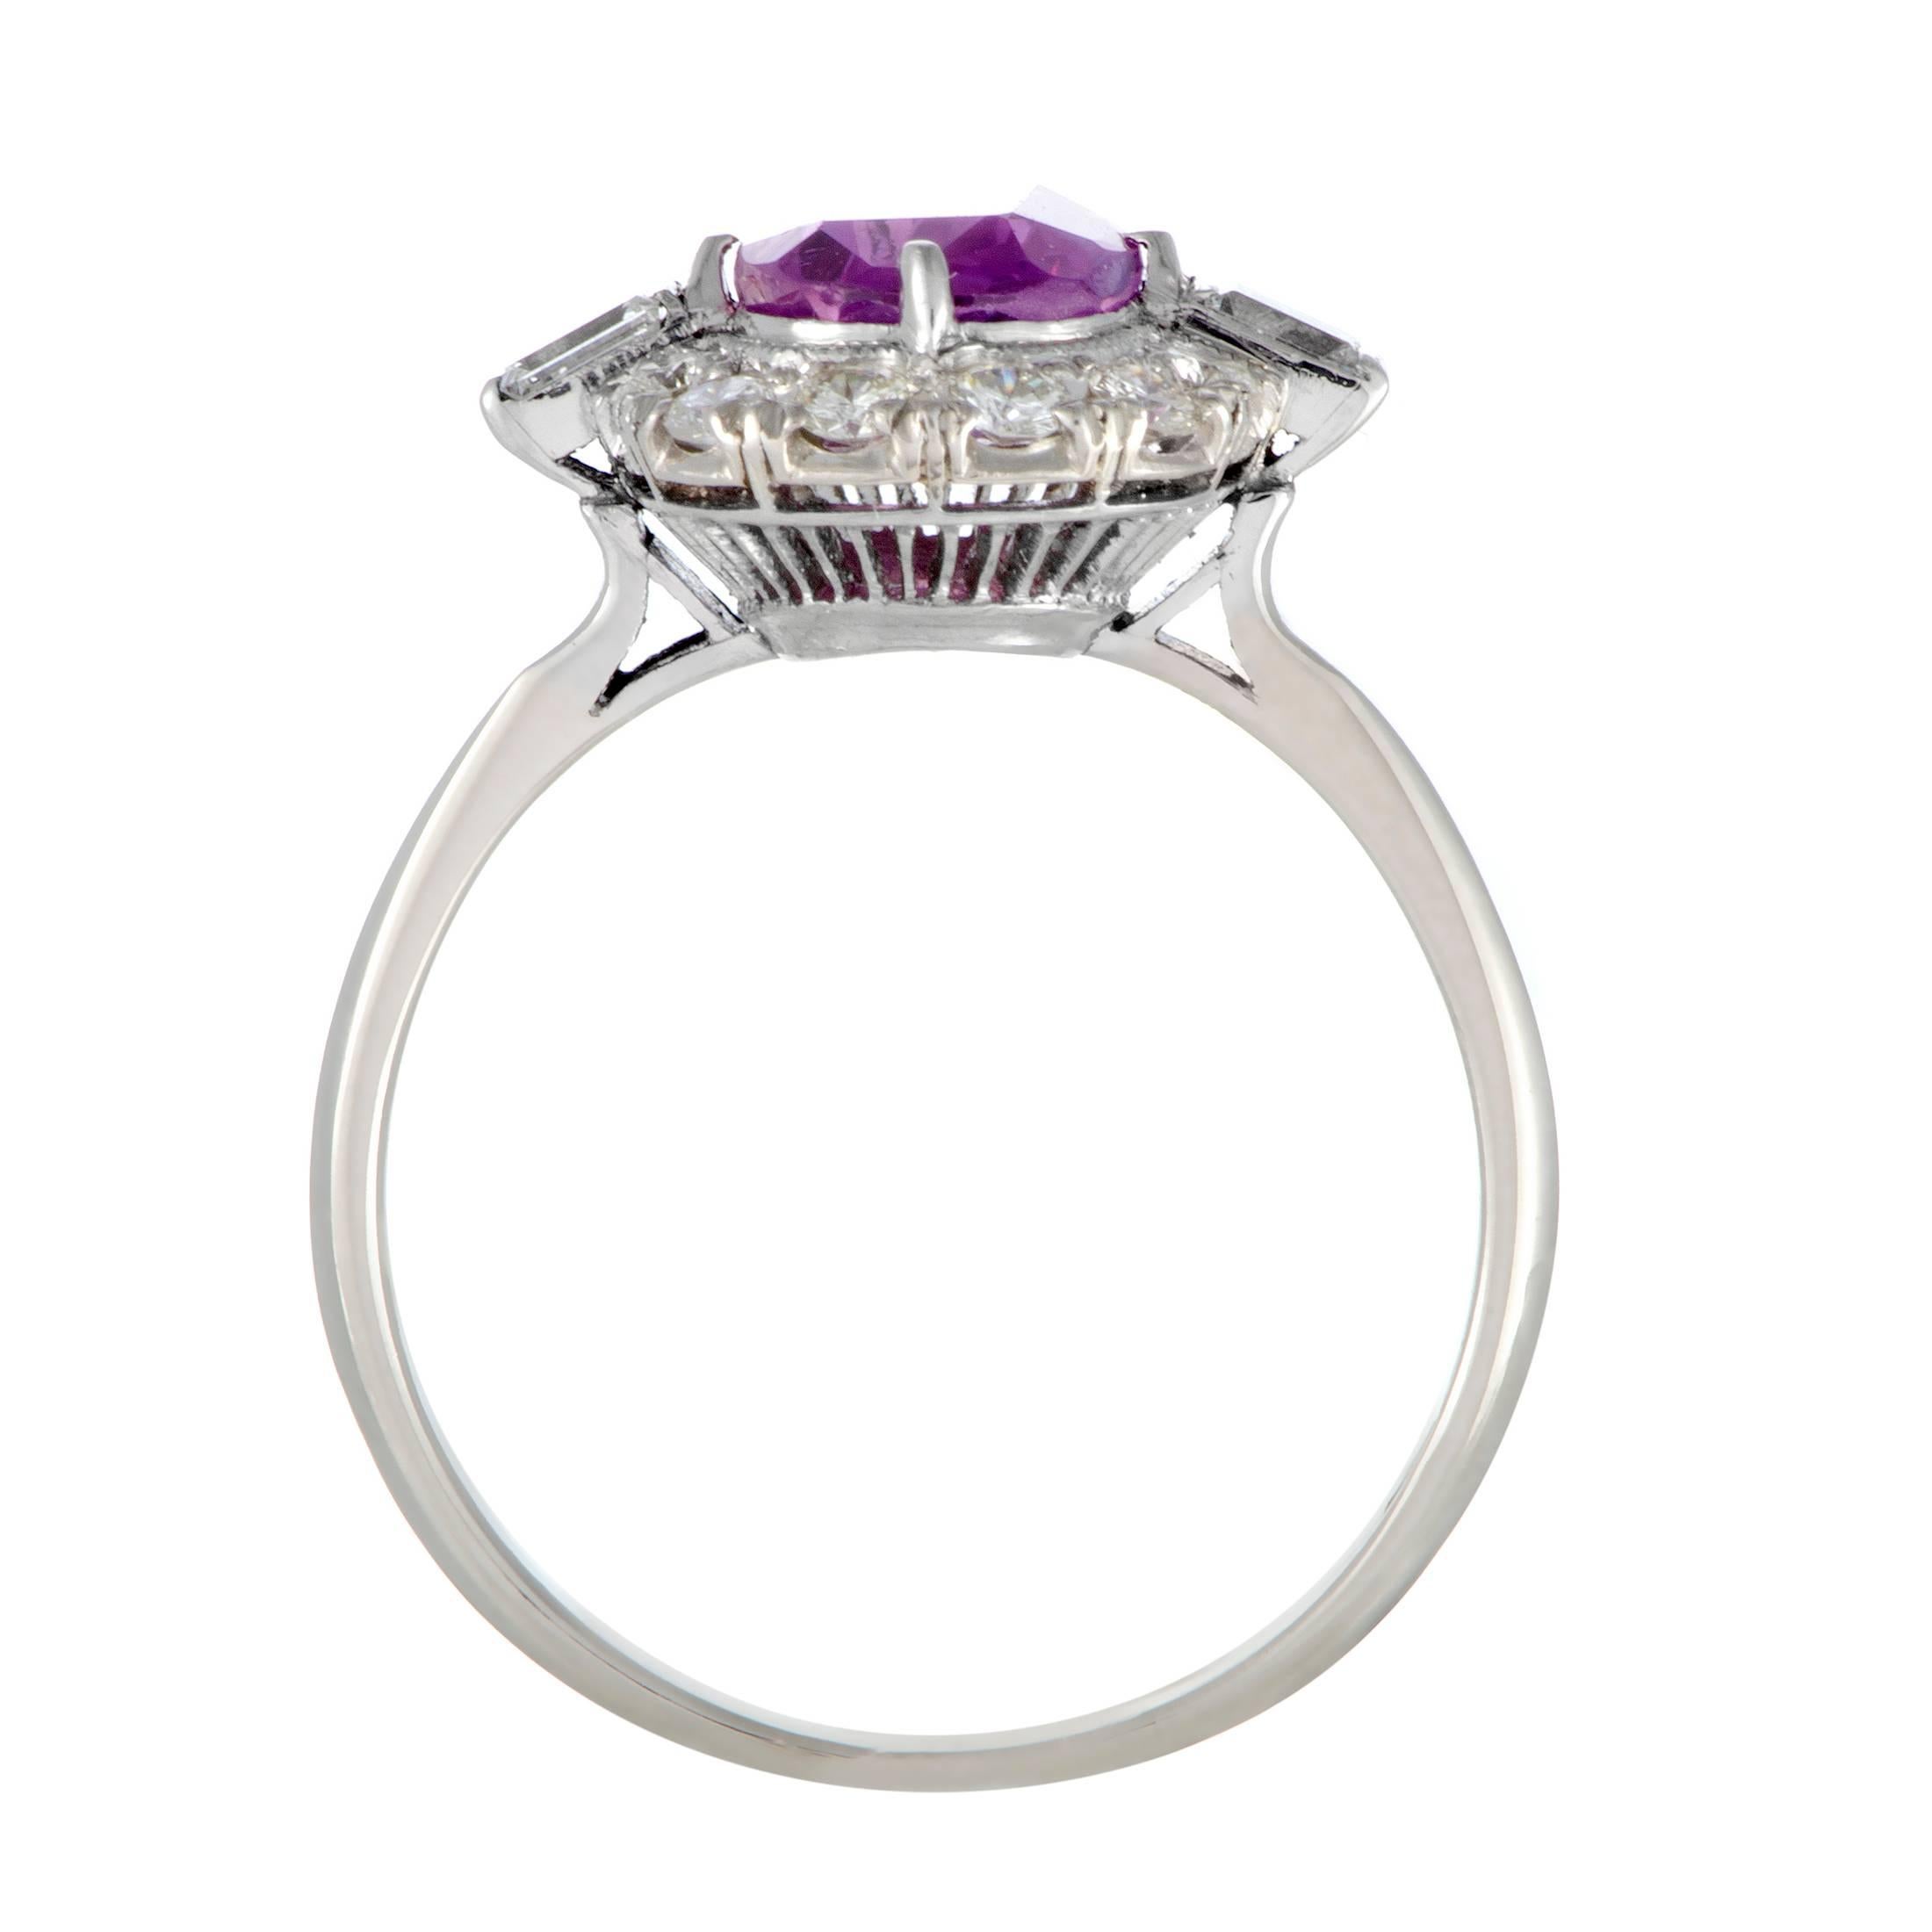 Exuding its vivacious color and feminine charm against the wonderful harmonious brightness of shimmering platinum and sparkling diamonds amounting to 0.60 carats, the gorgeous pink sapphire weighing 2.73 carats produces a fantastic visual presence